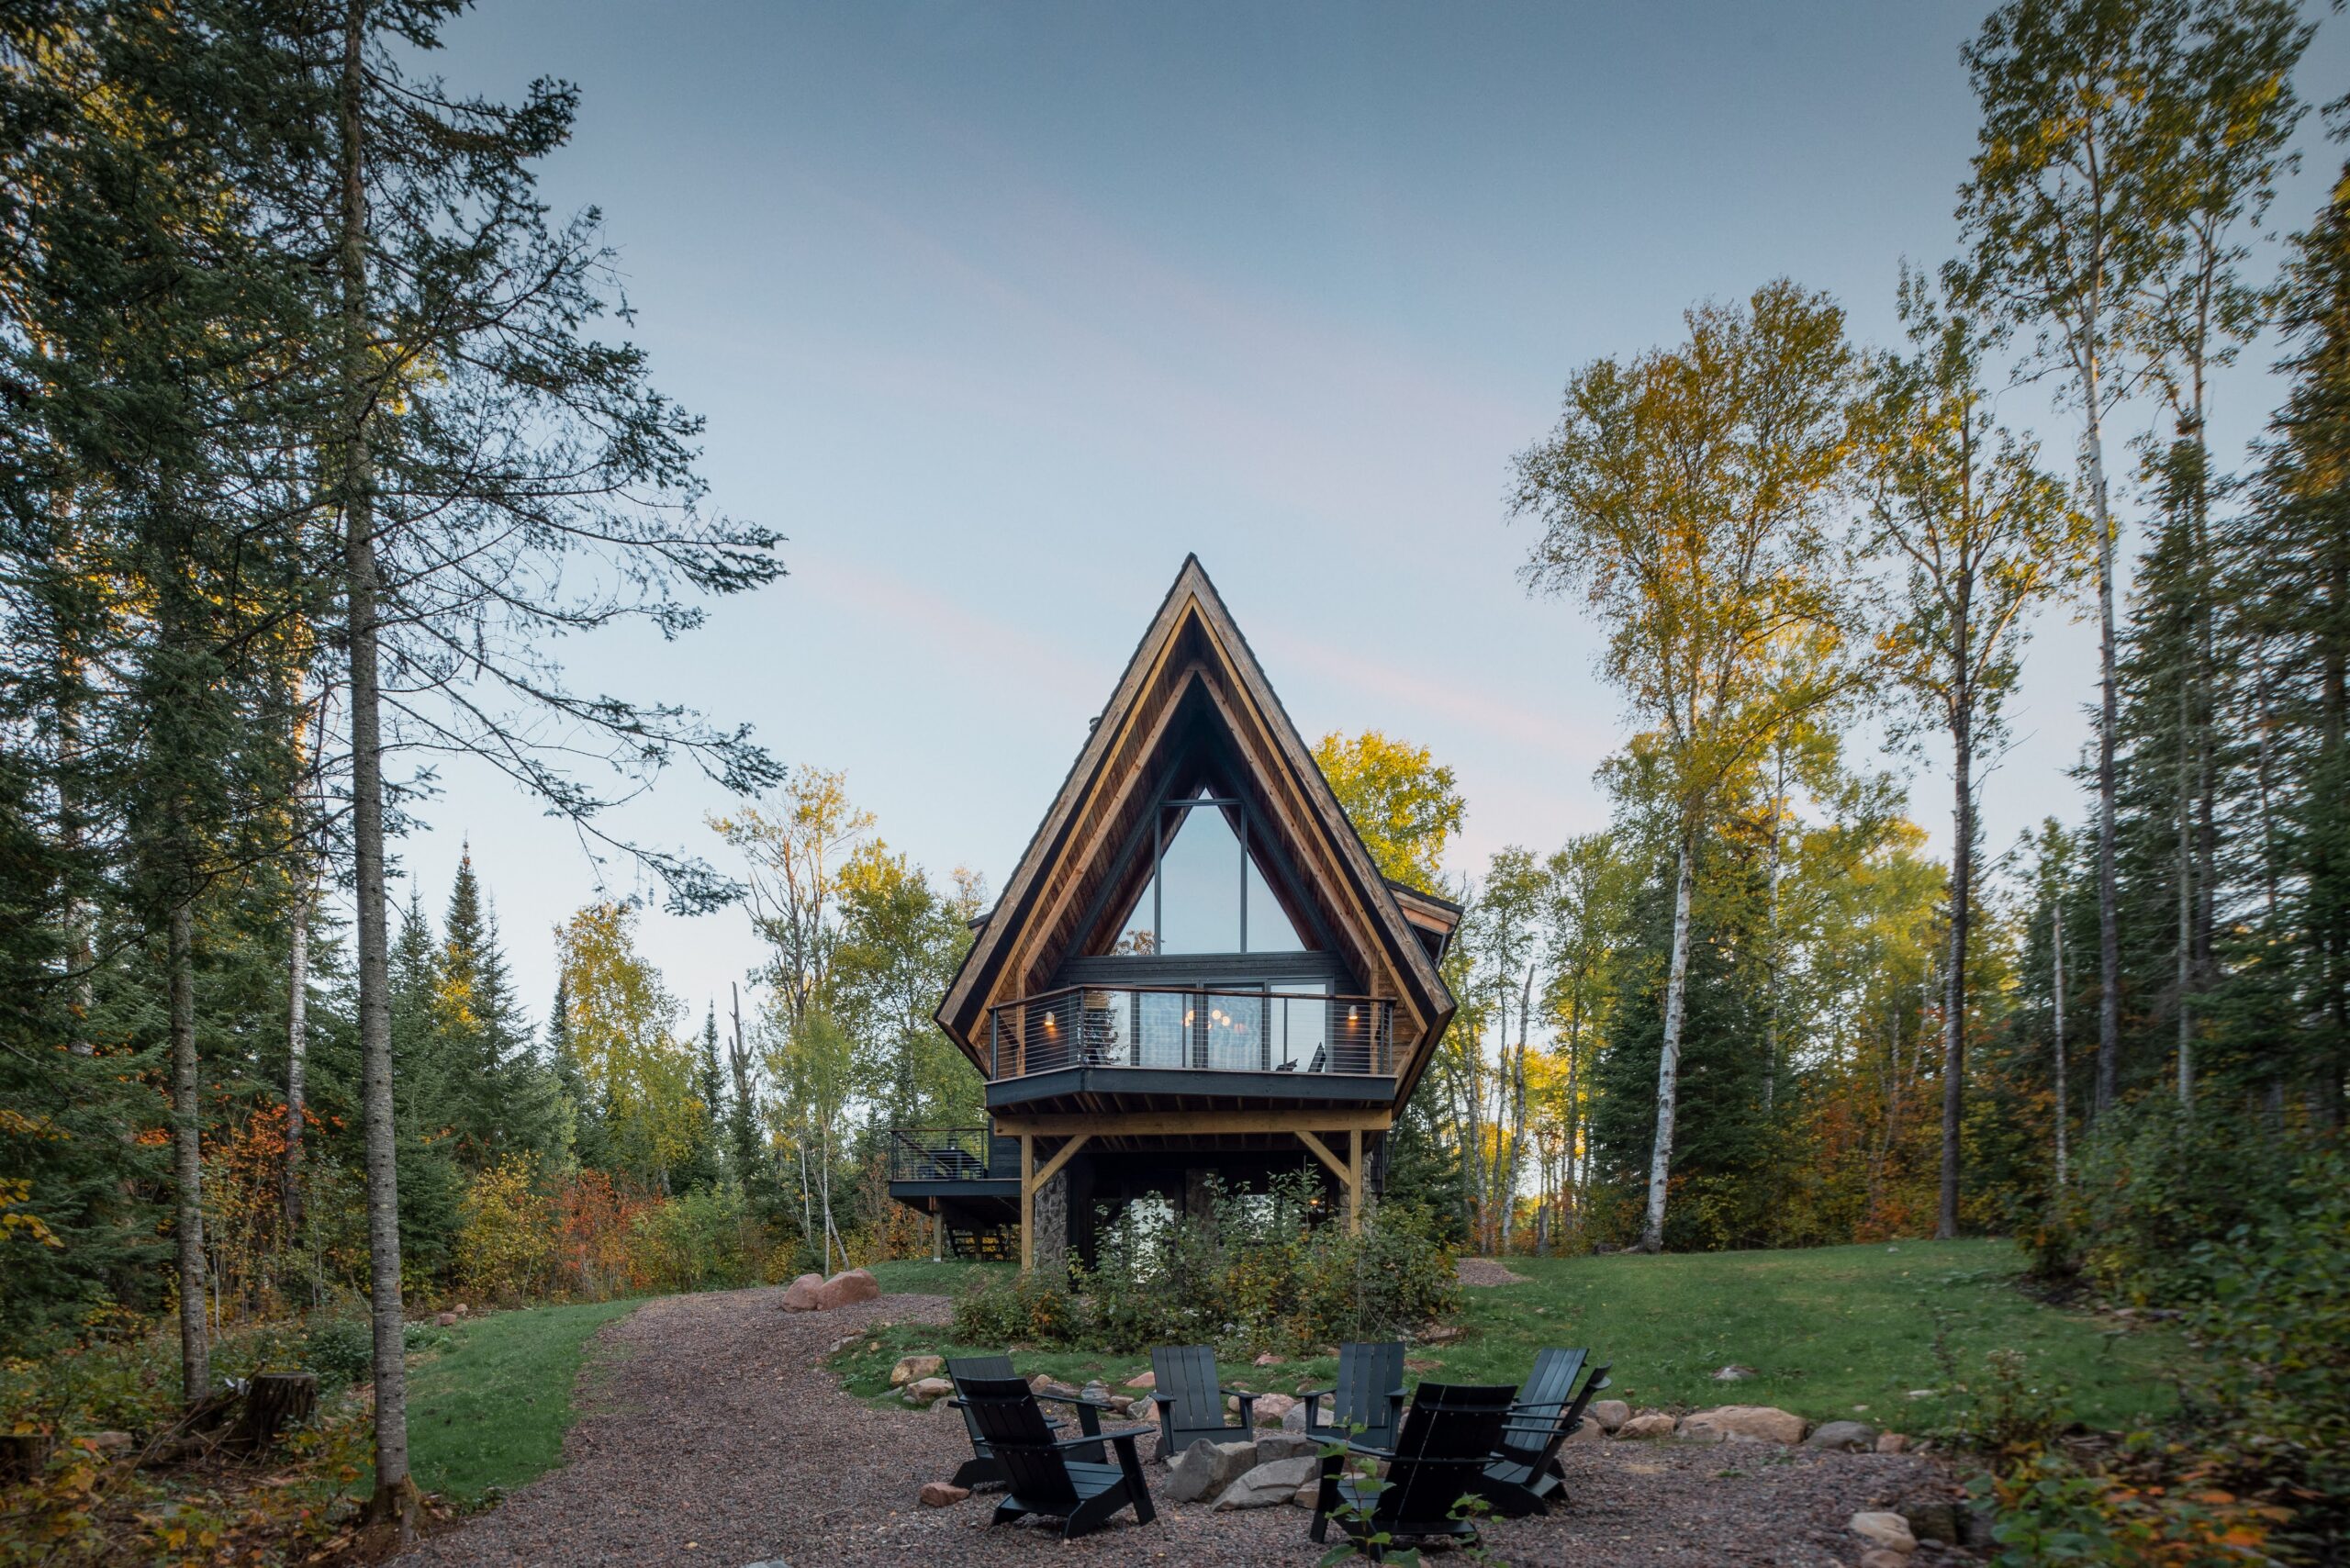 Outside wooded area view of The Minne Stuga Cabin in Grand Marais Minnesota at dusk prominently featuring Kebony modified wood siding throughout the houses' design